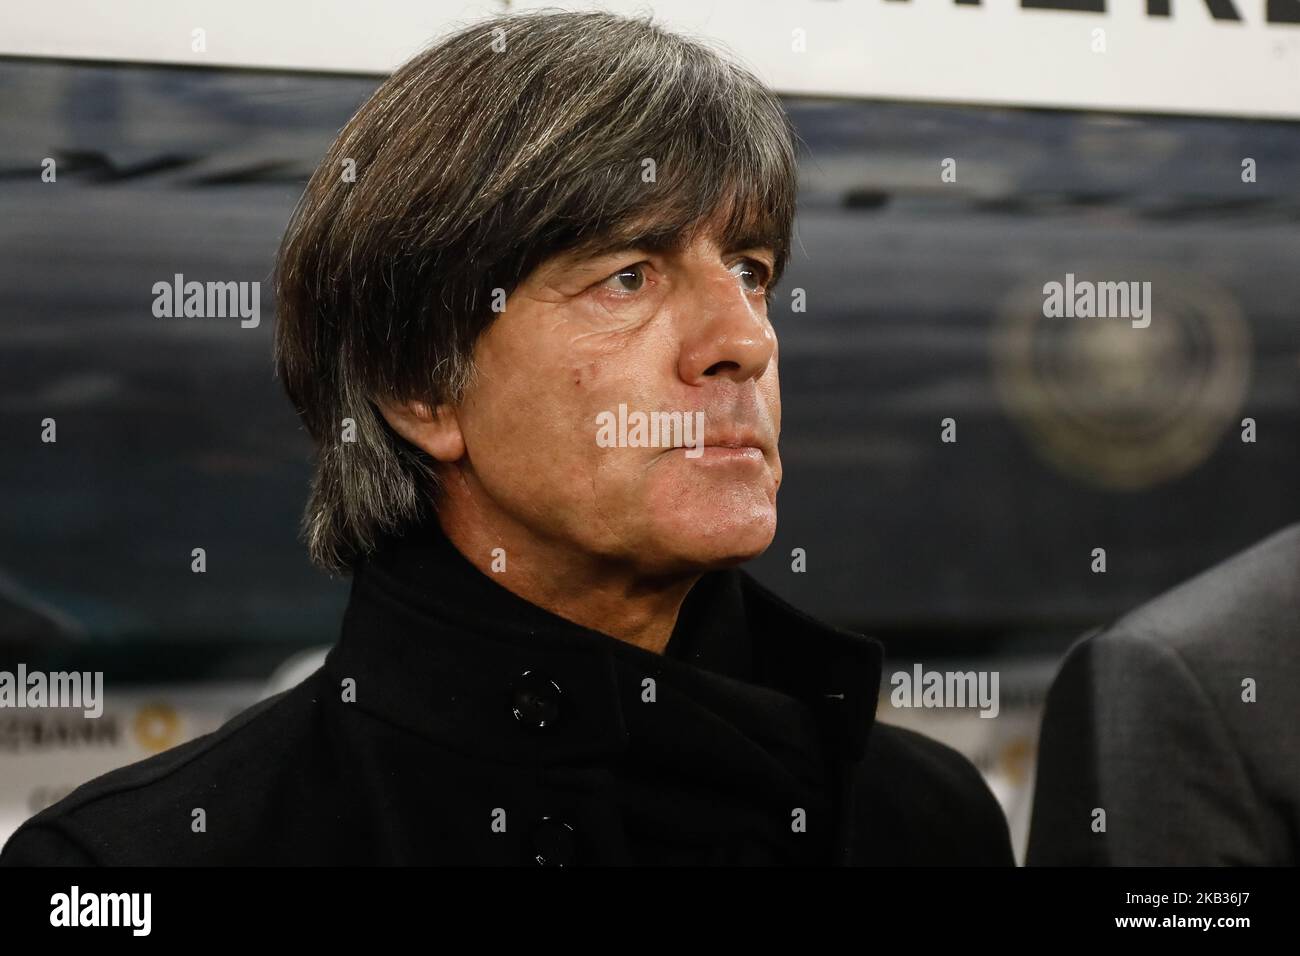 Germany head coach Joachim Loew looks on during the international friendly match between Germany and Russia on November 15, 2018 at Red Bull Arena in Leipzig, Germany. (Photo by Mike Kireev/NurPhoto) Stock Photo